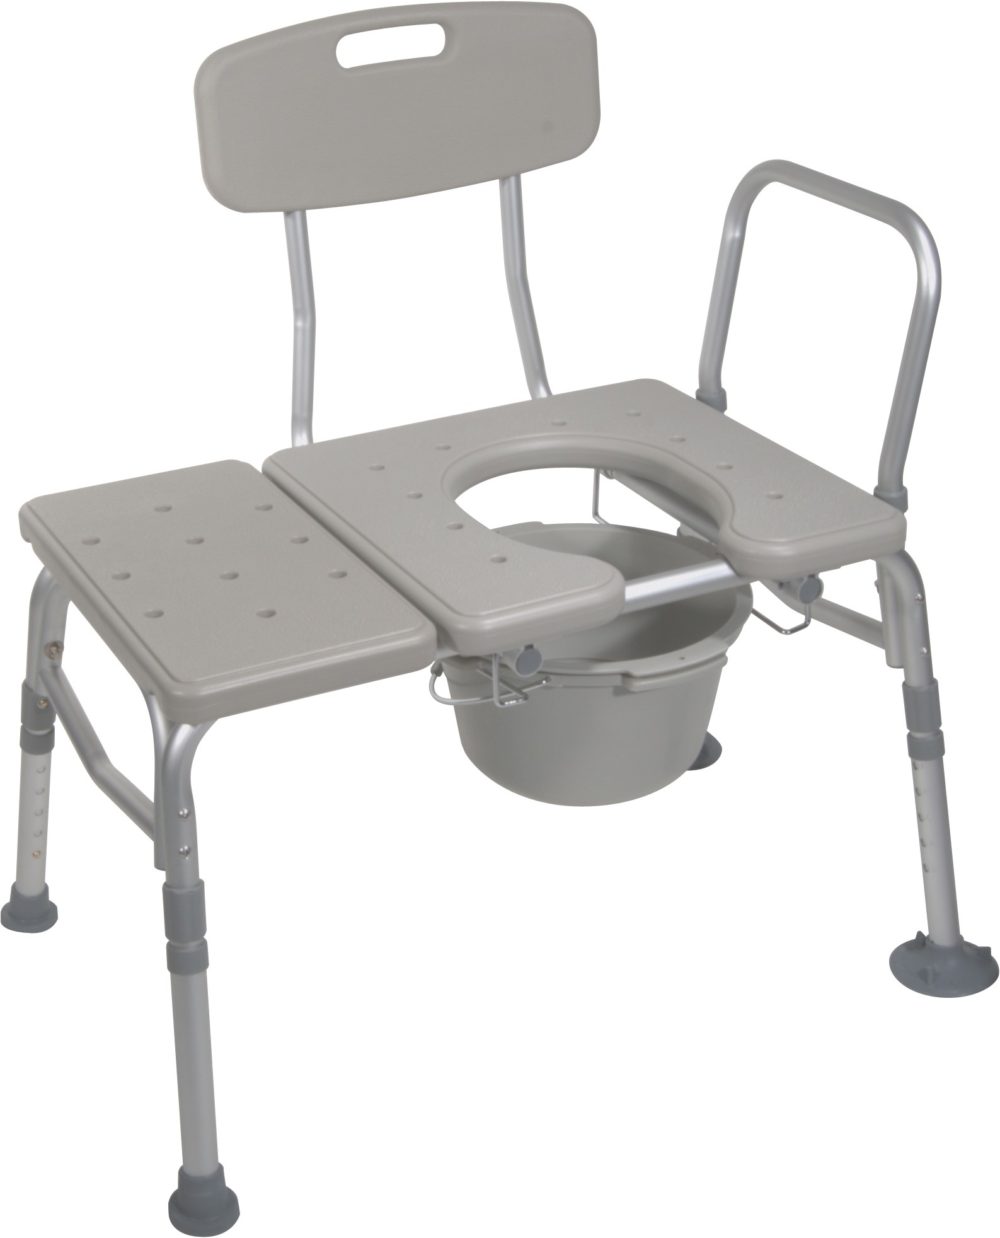 Living Well HME |Transfer Bench - Transfer Bench with Commode Opening